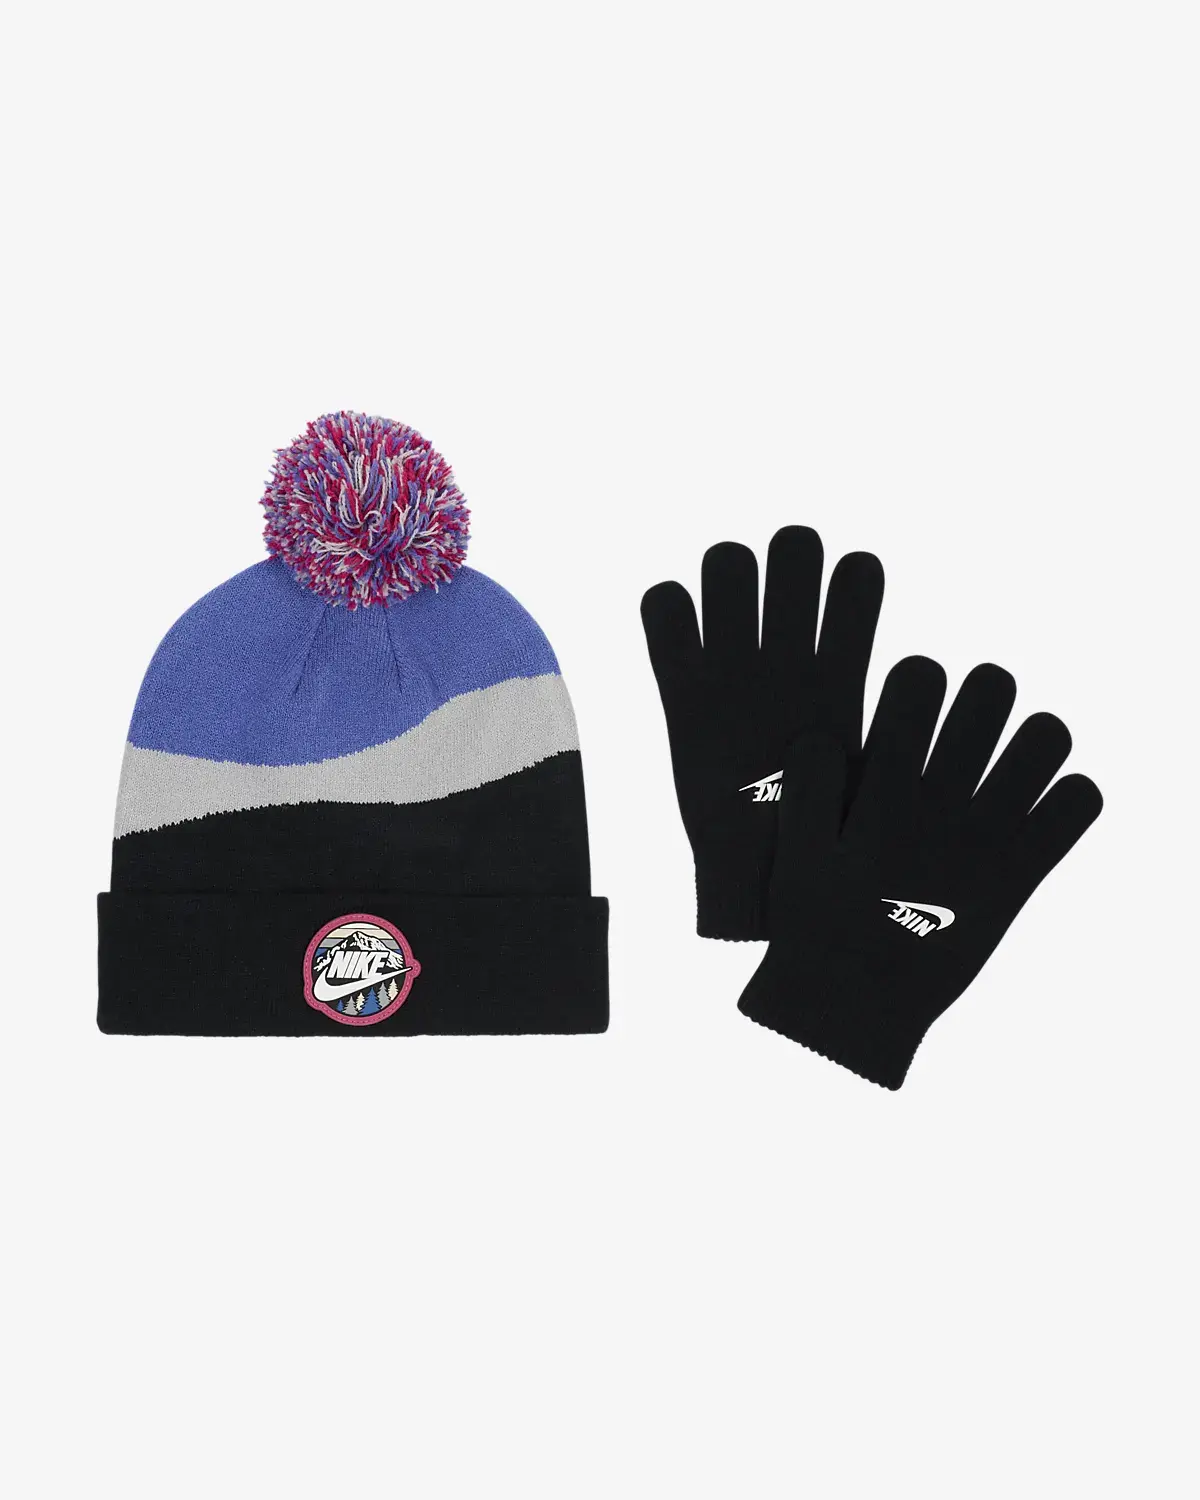 Nike Snow Day Beanie and Gloves Set. 1